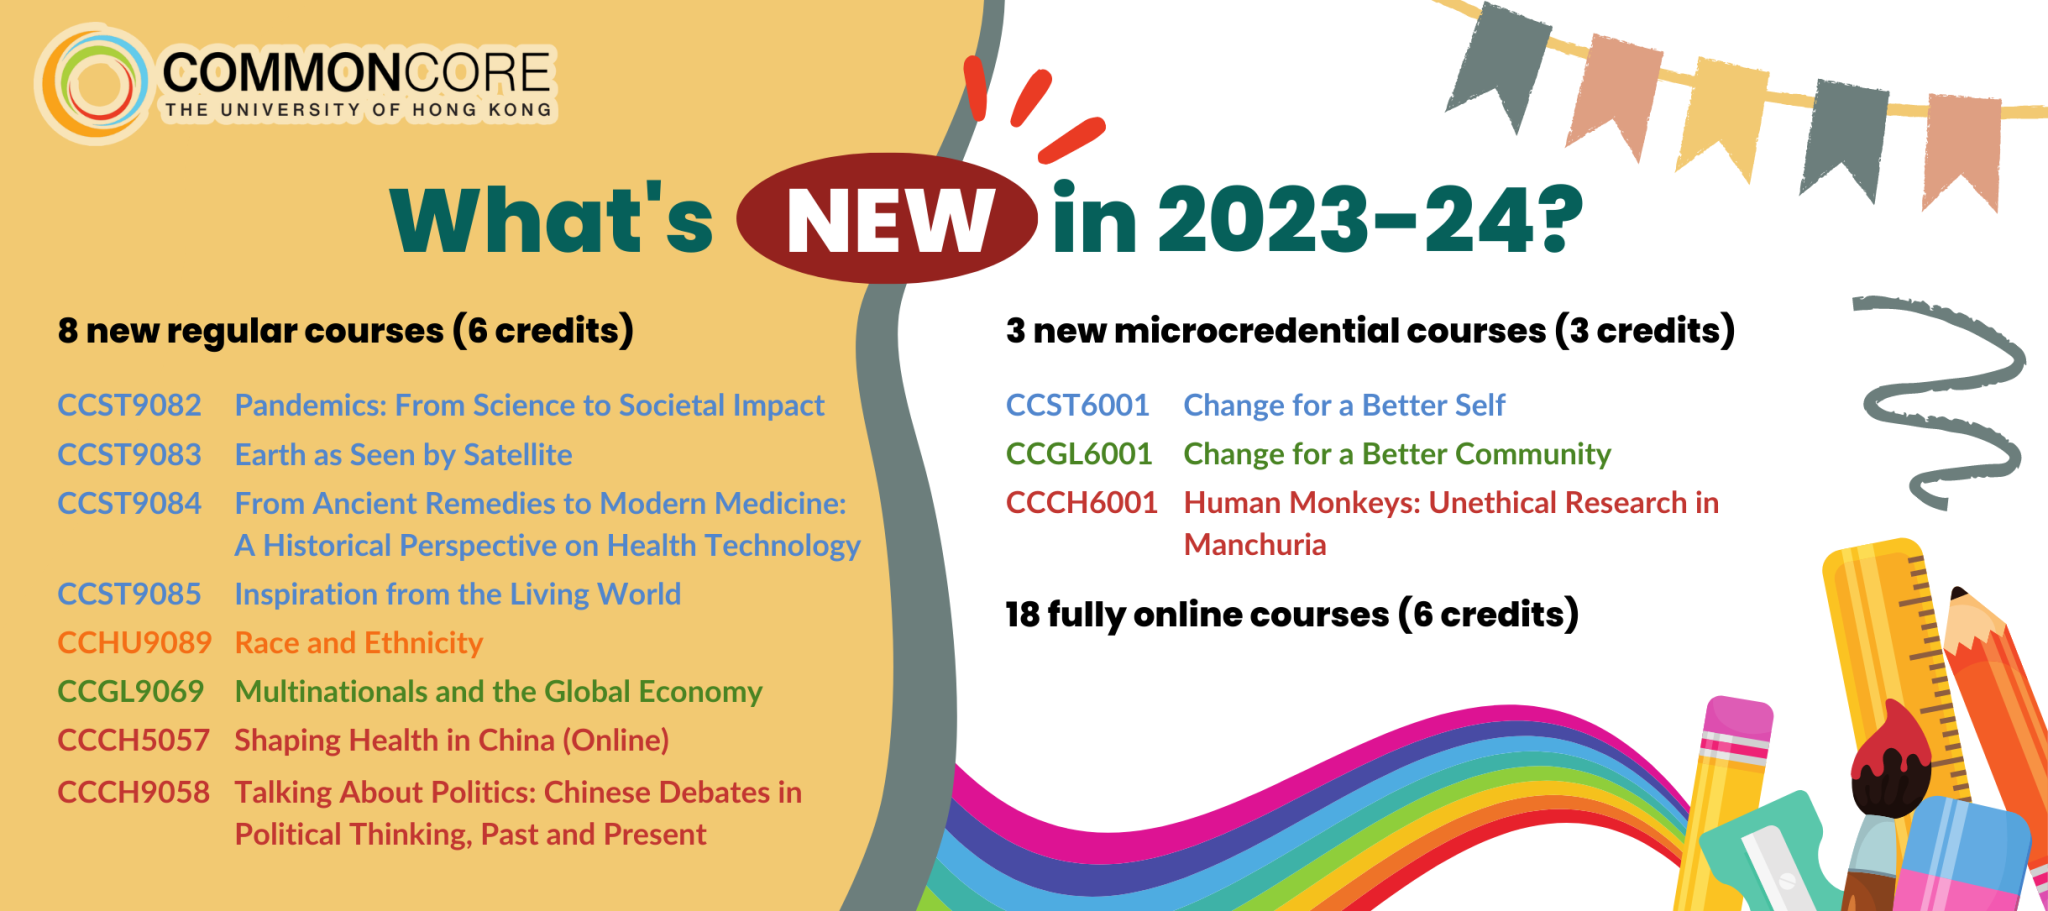 What's new in 2023-24